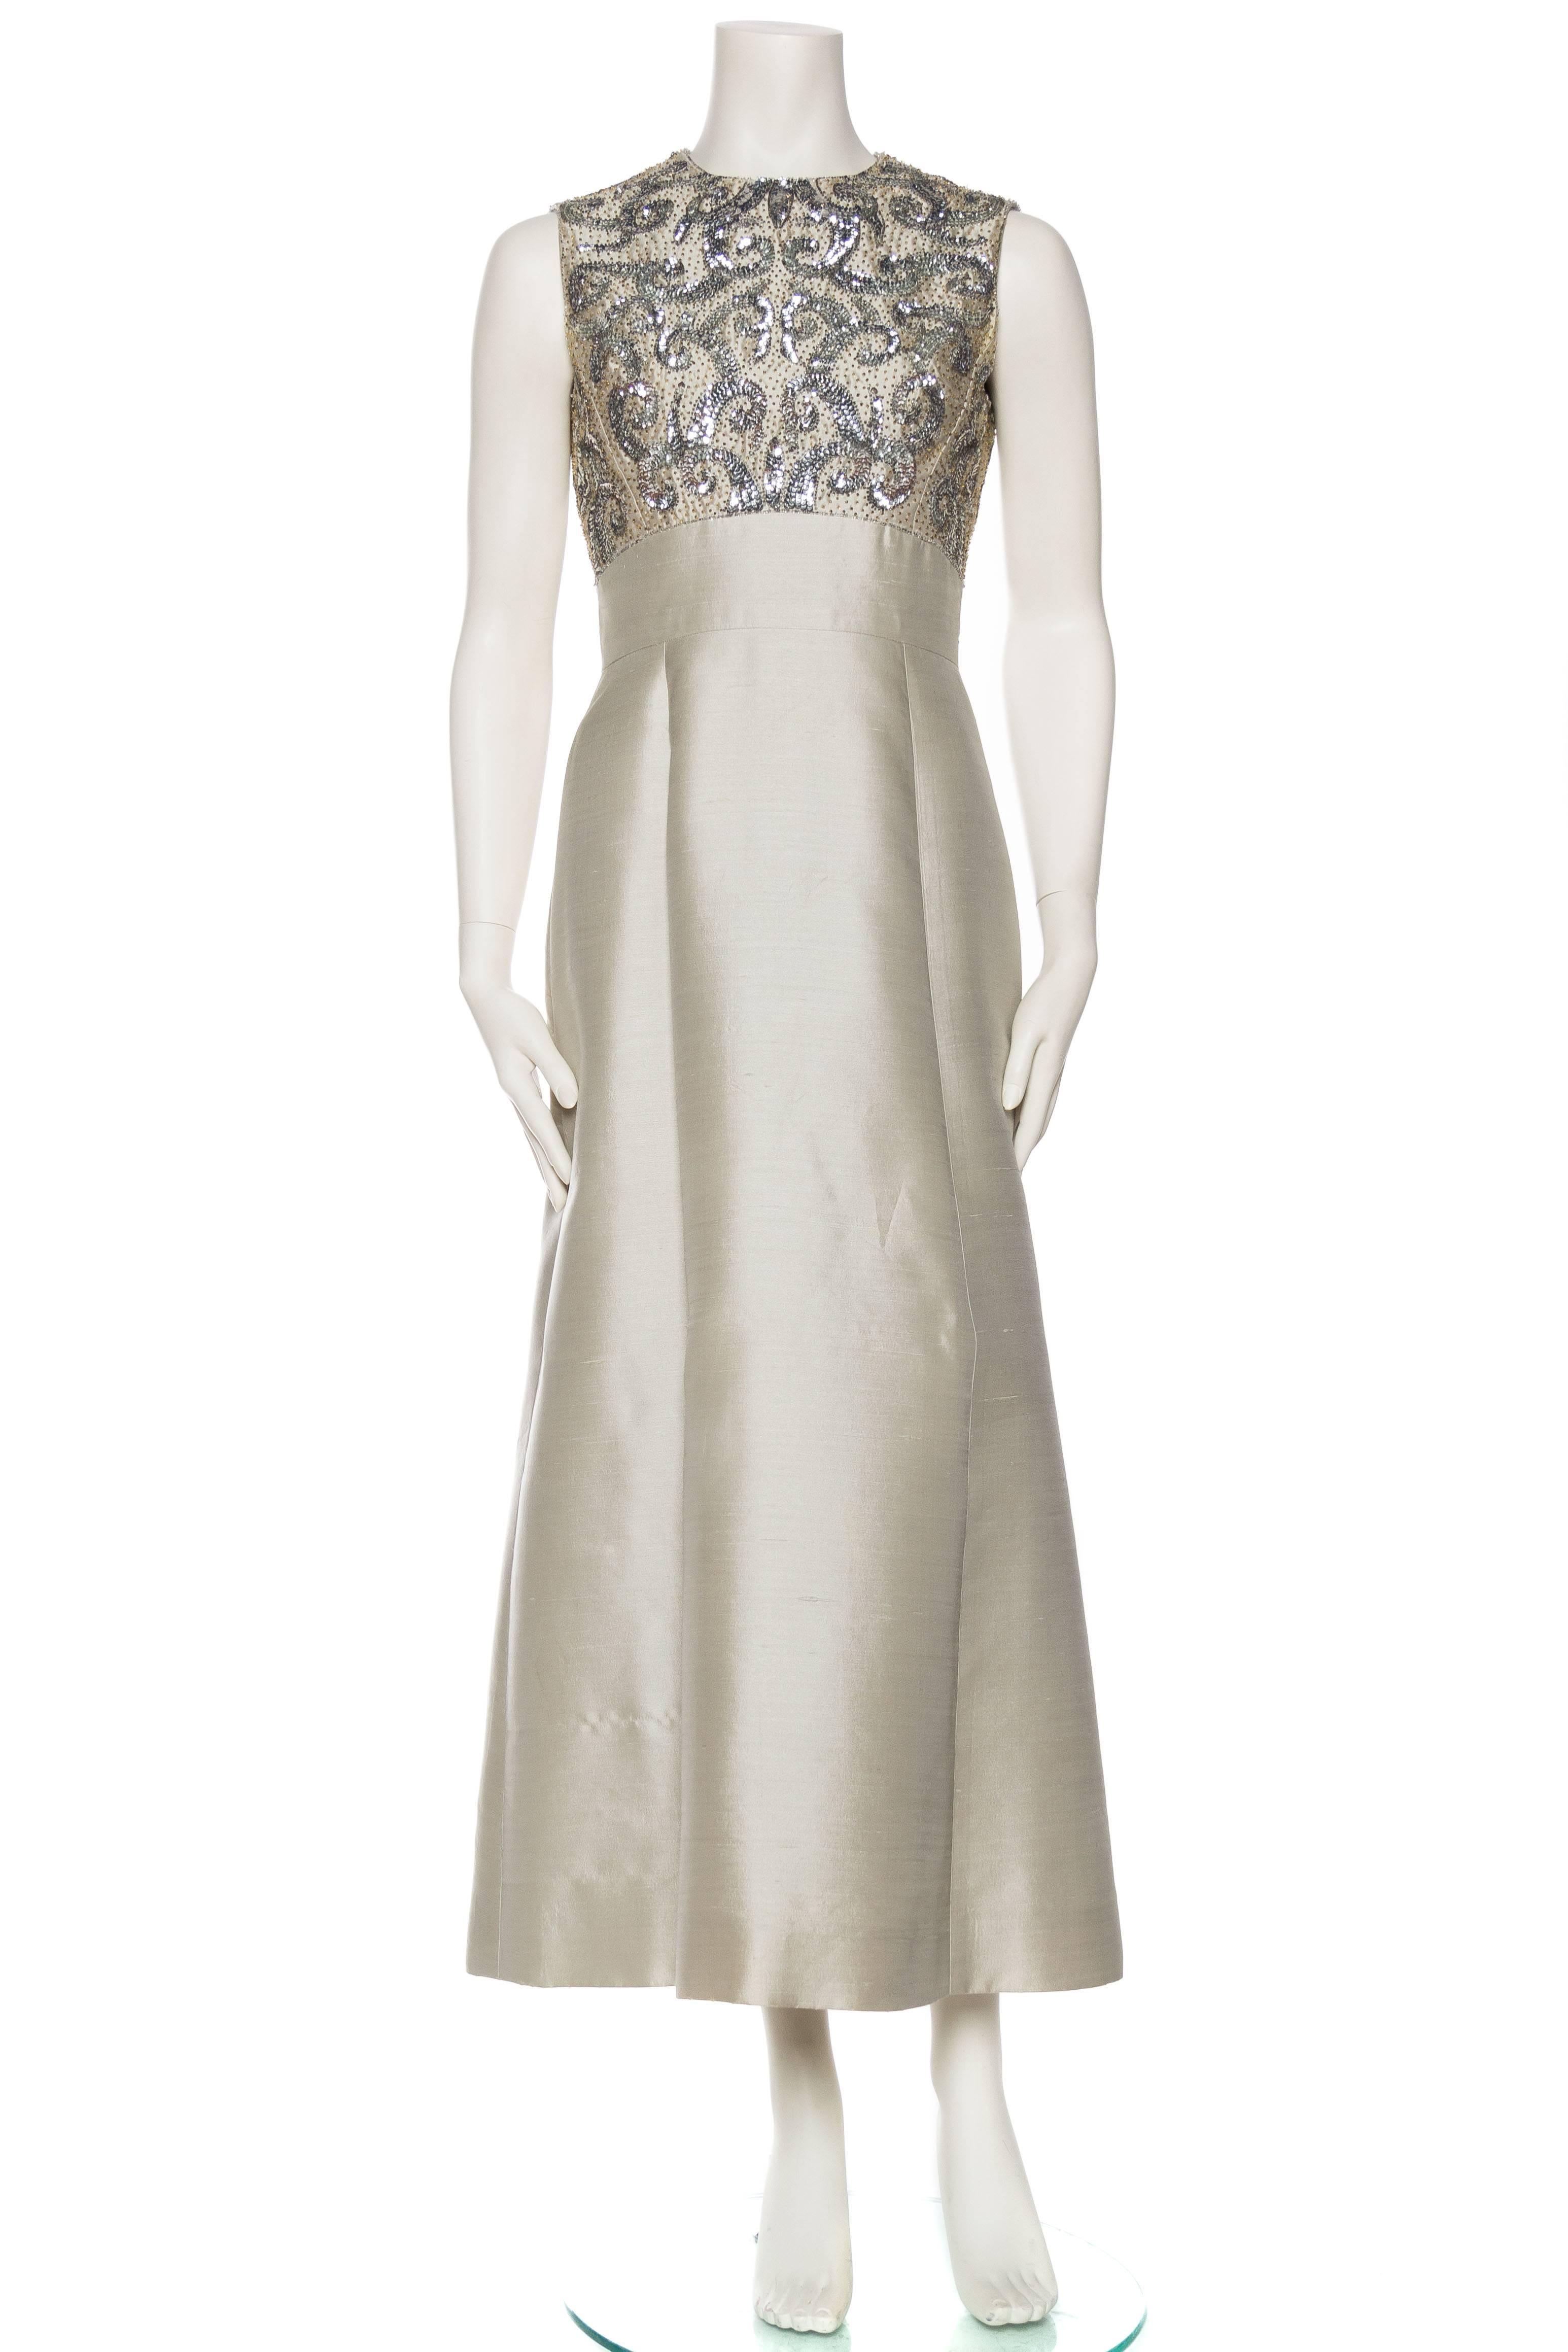 1960S GIBSON BAYH COUTURE Oyster Grey Silk Radzimir Half Empire Waist Silver Gown With Beaded Bodice